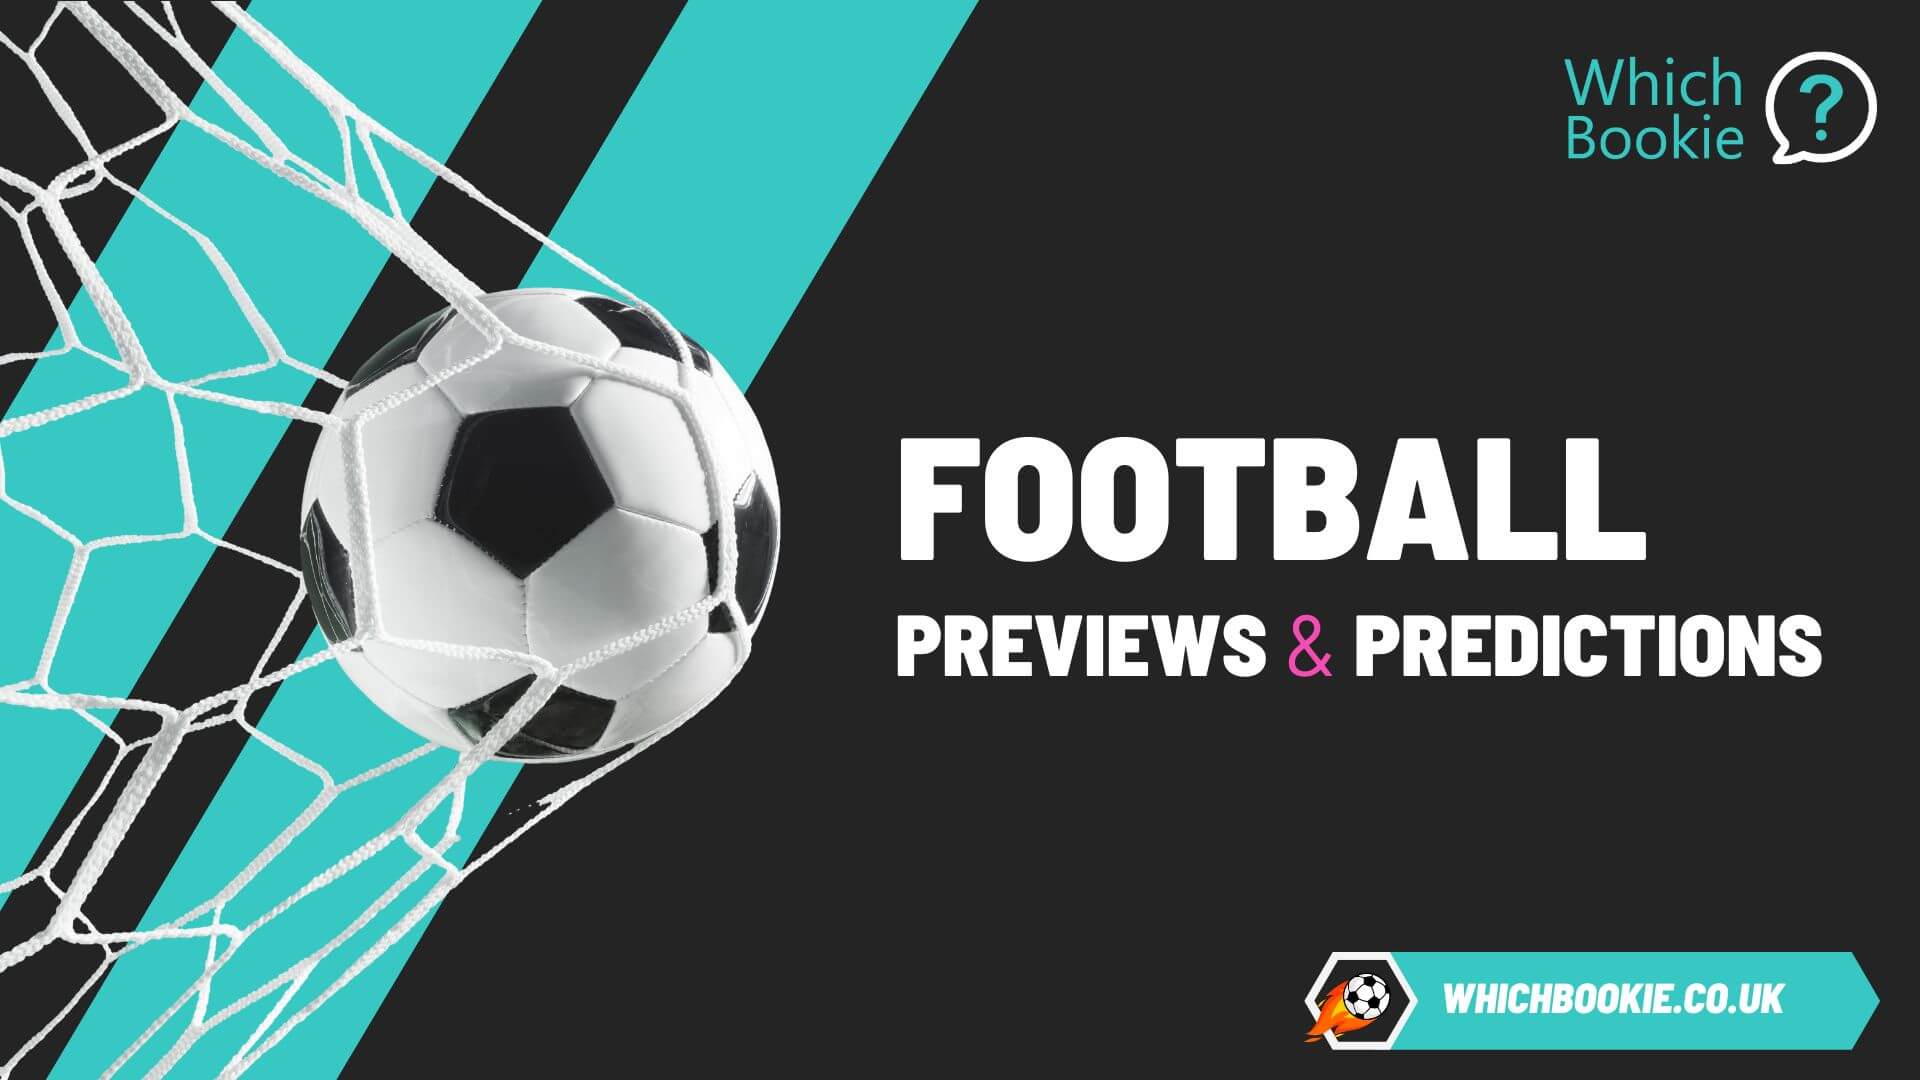 Newcastle vs West Ham Prediction, Betting Tips & Preview